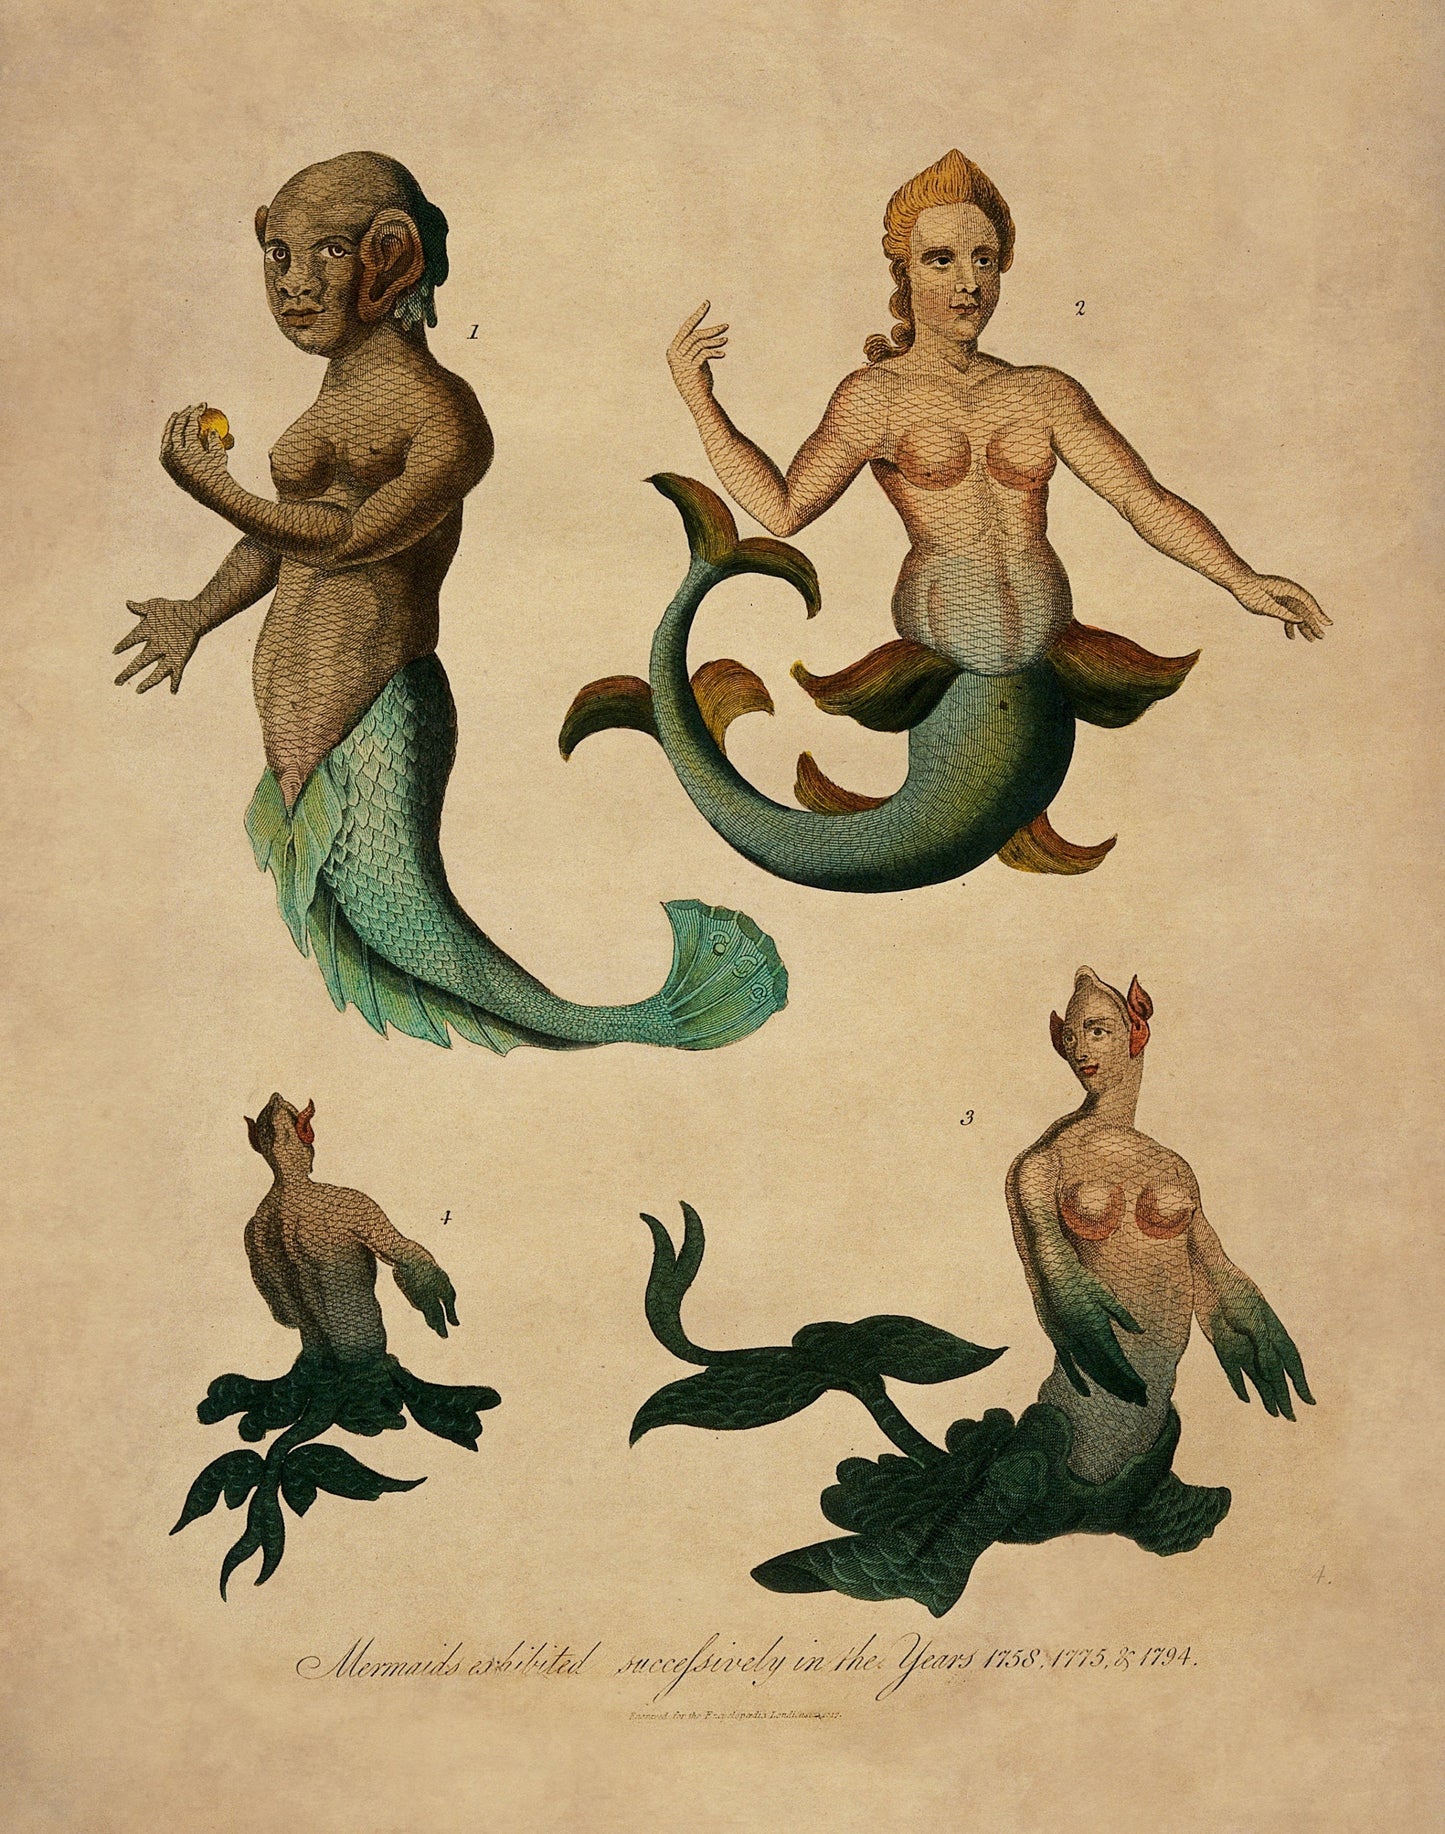 Mermaids exhibited successively in the years 1758,1775 and 1794 Antique Reproduction - Print dated 1817 - Available Framed